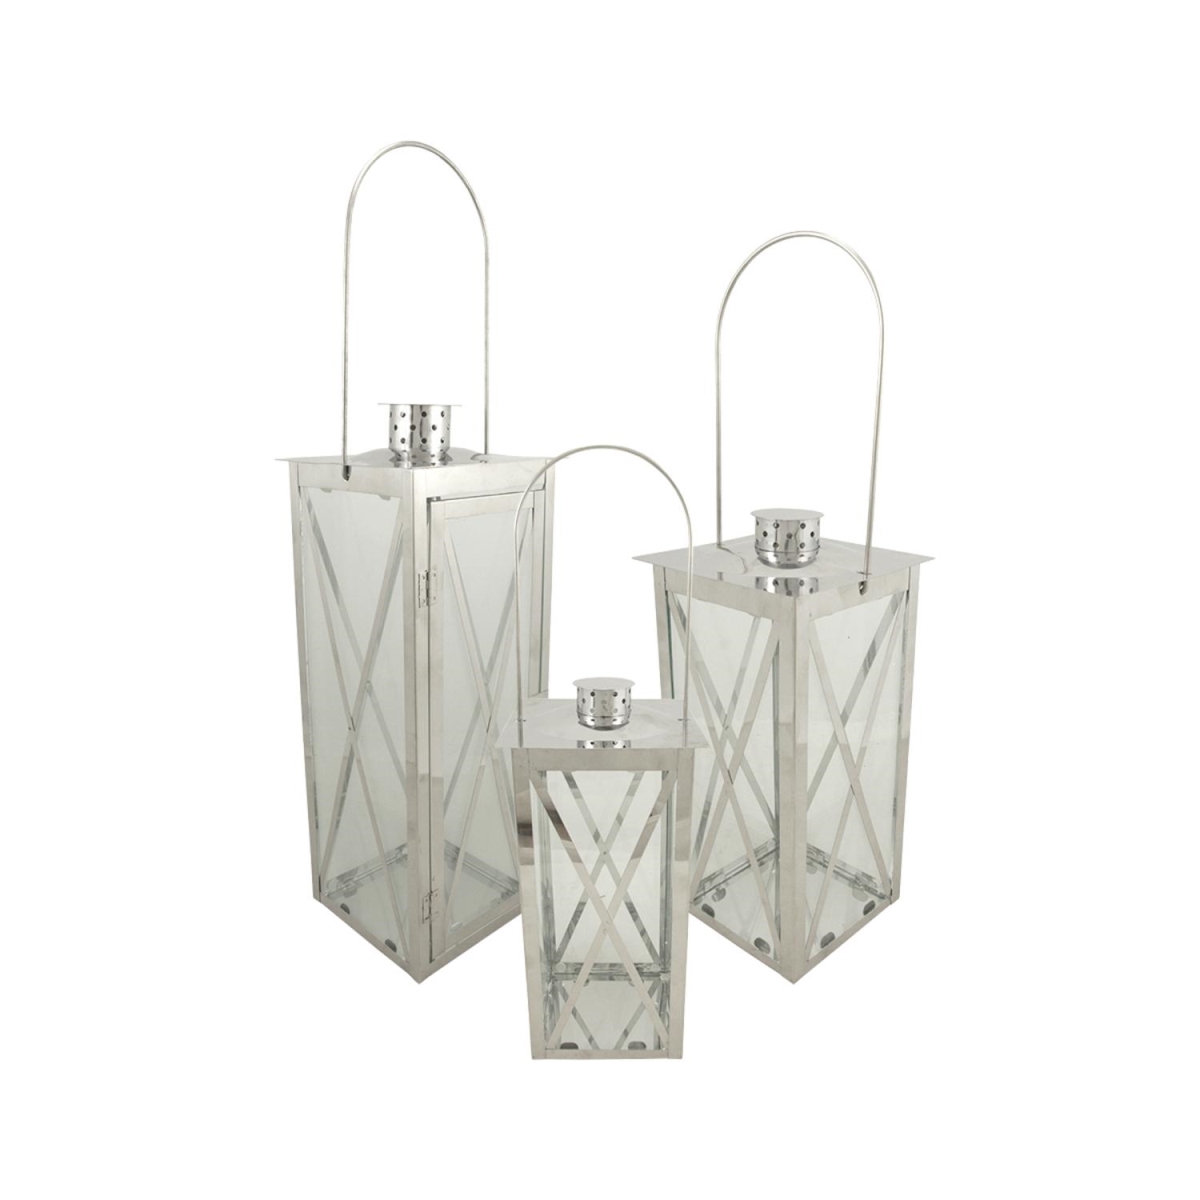 31320386 18 In. Silver Stainless Steel Finish Cottage Style Pillar Candle Holder Lantern, Set Of 3